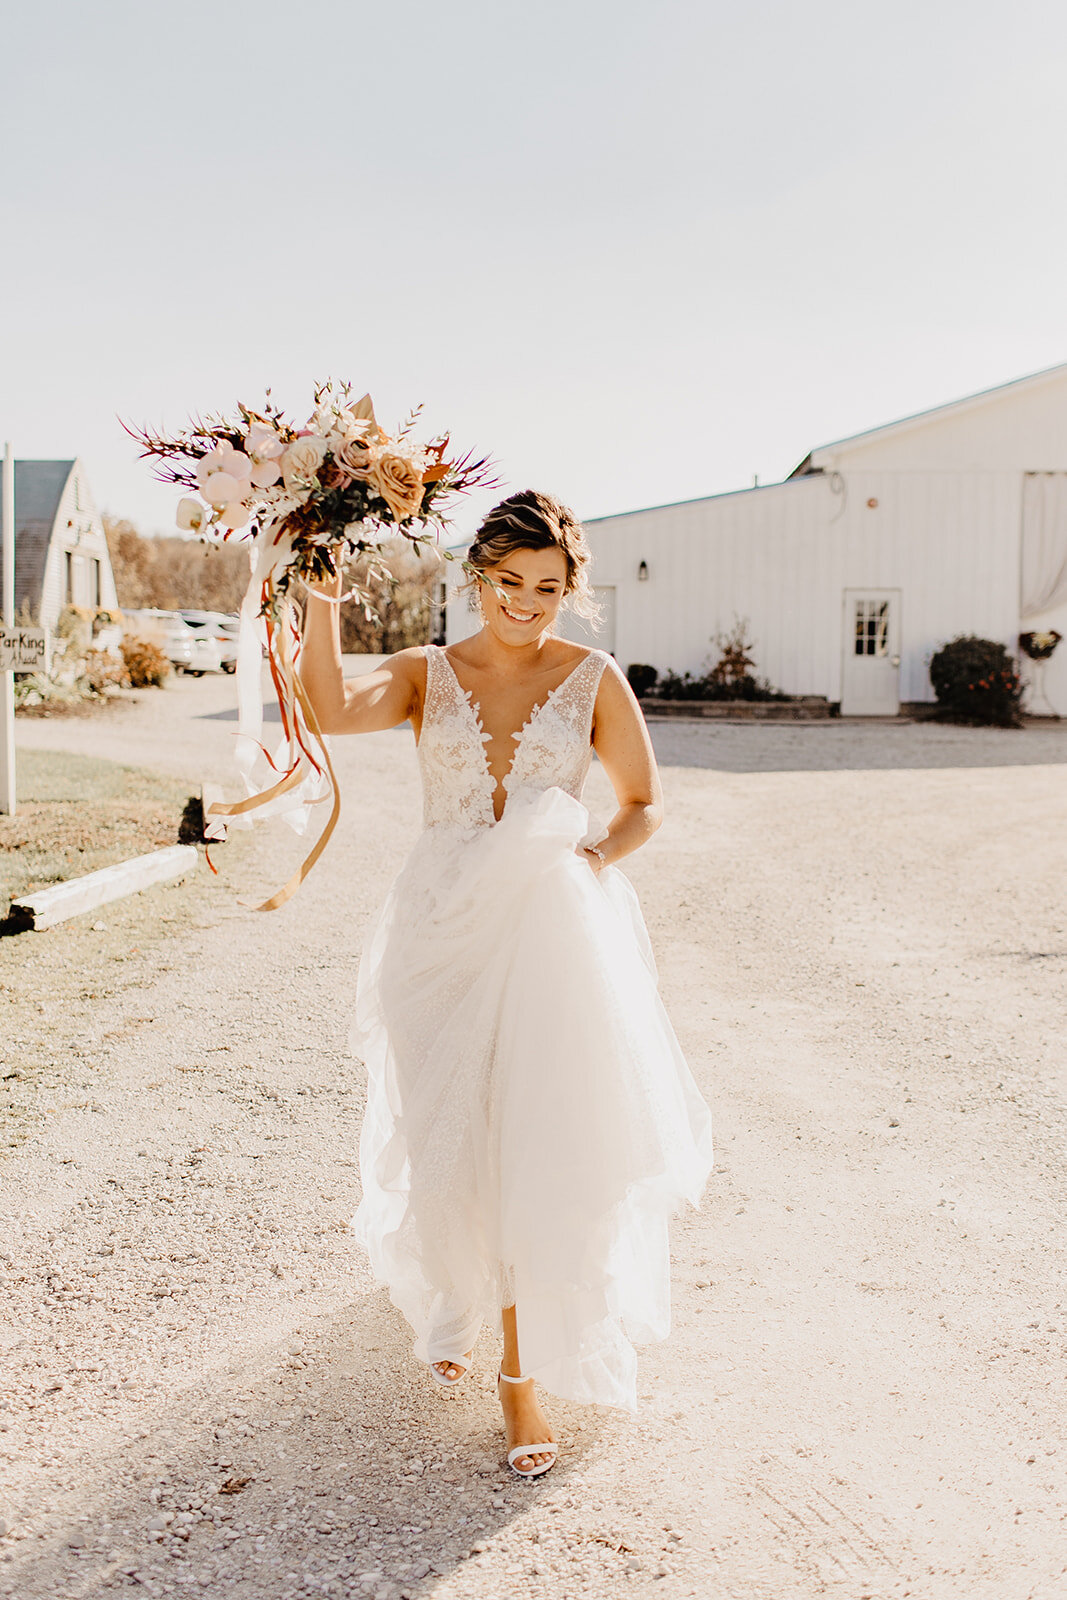 Whimsical Fall Wedding at Emerson Creek captured by Rachel Mae Photography | CHI thee WED